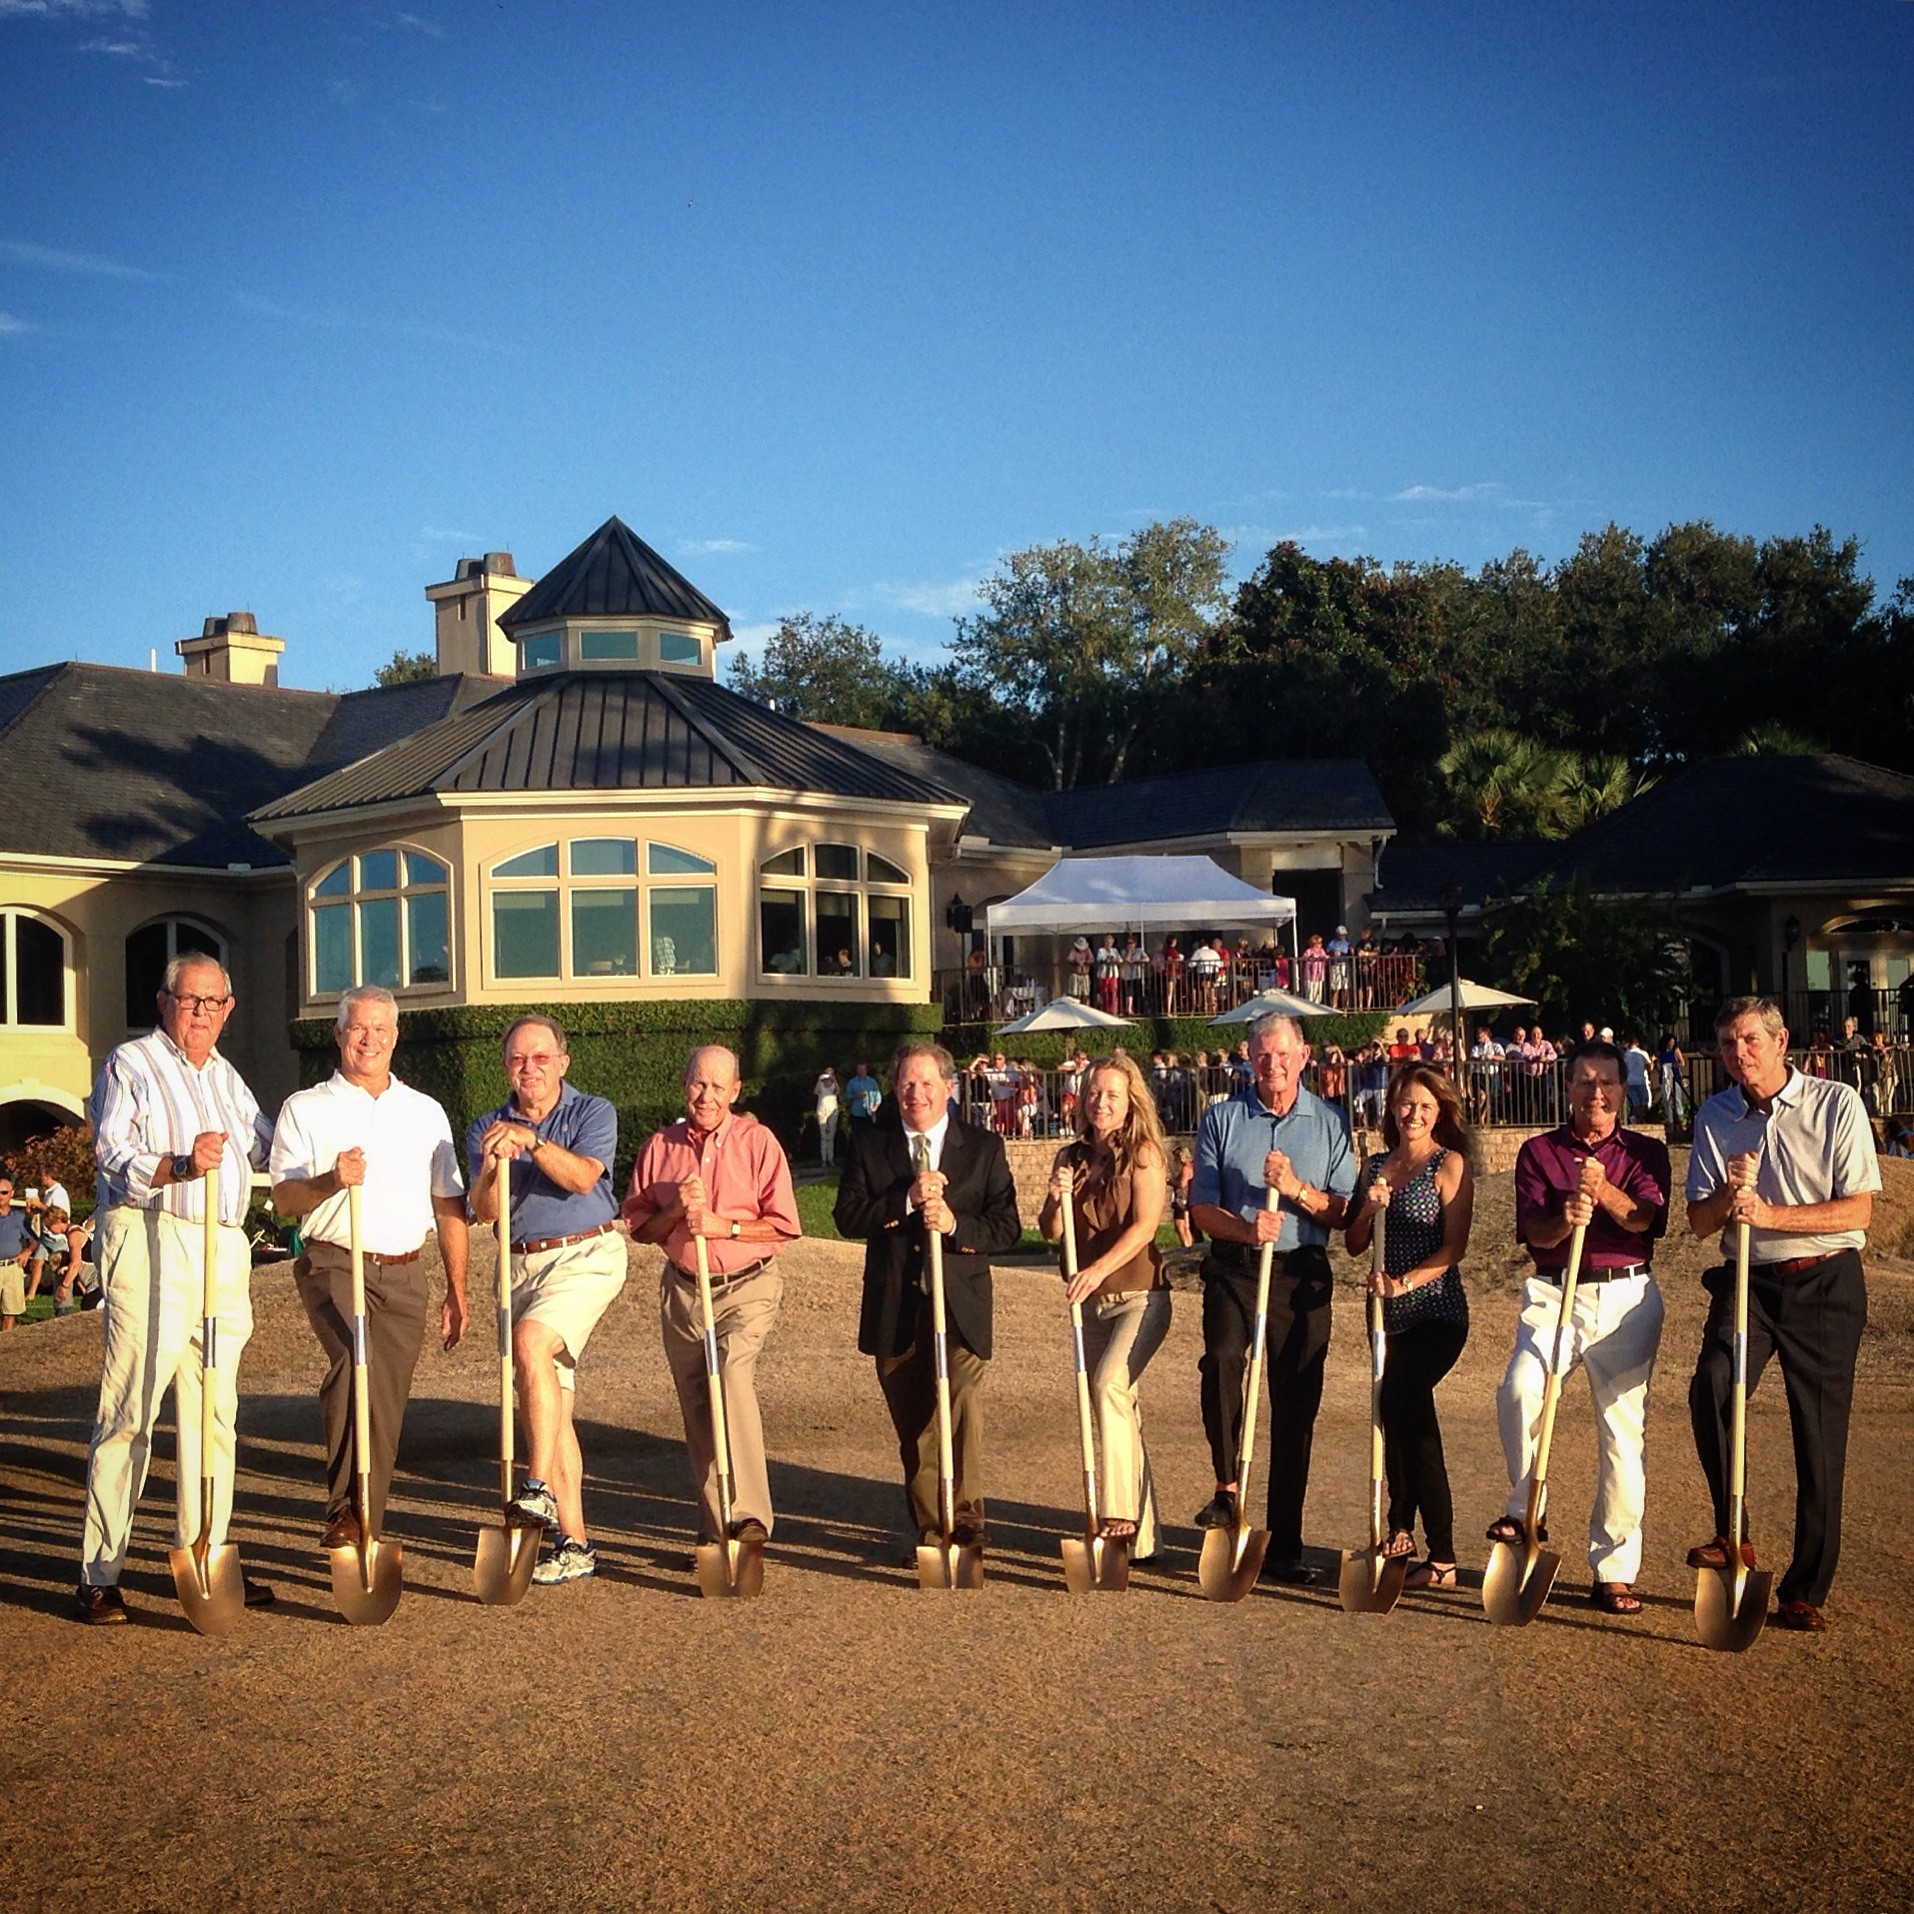 Club management broke ground on The Plantation's newest project last month: a $6 upgrade to the golf course.